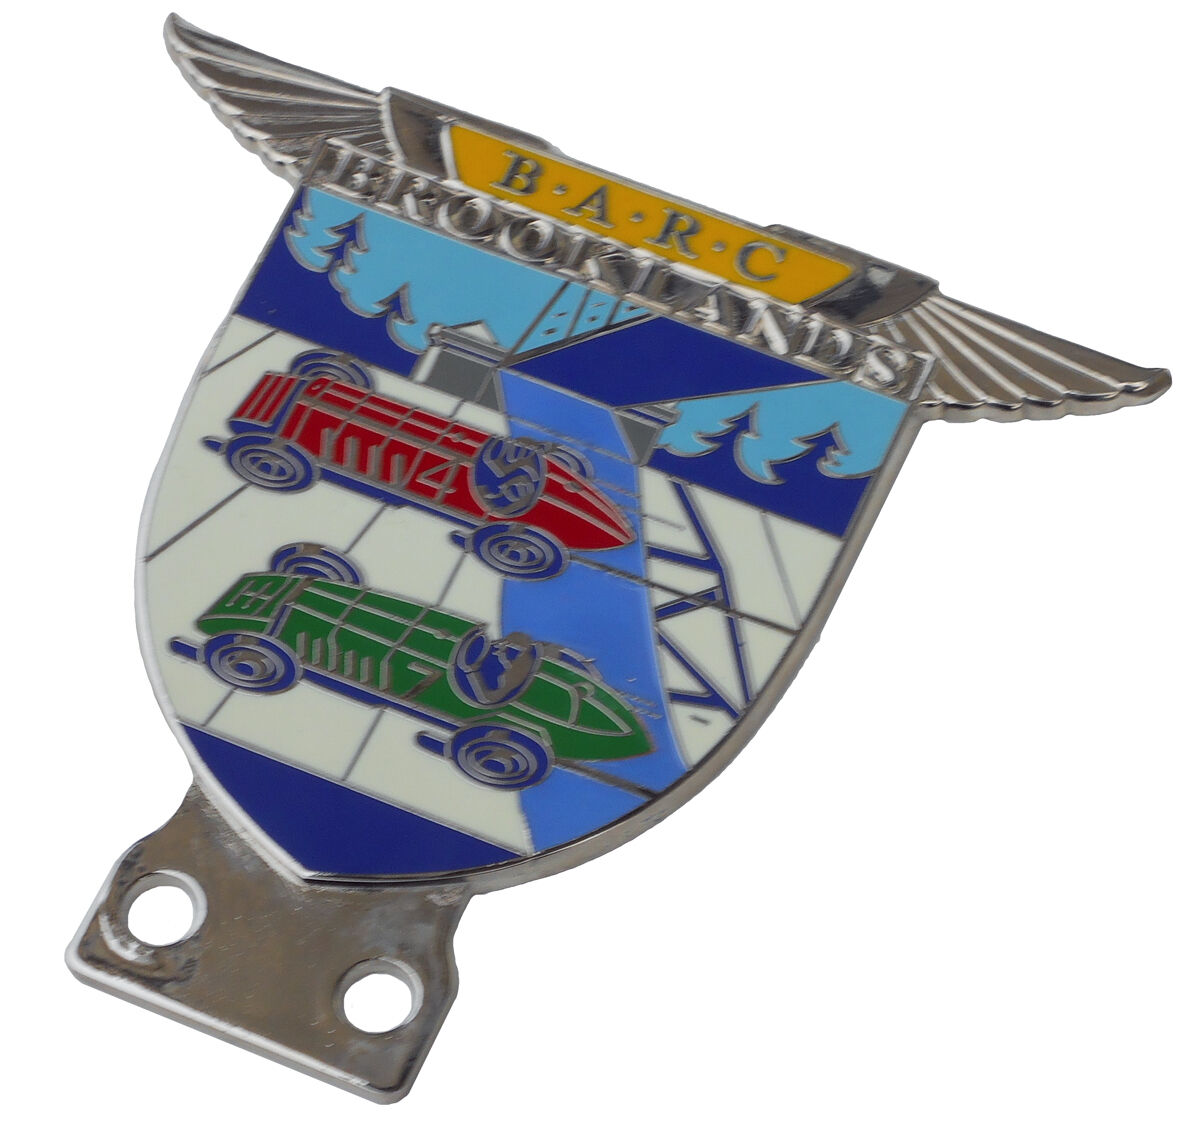 Brooklands banking pre-war style car grille badge